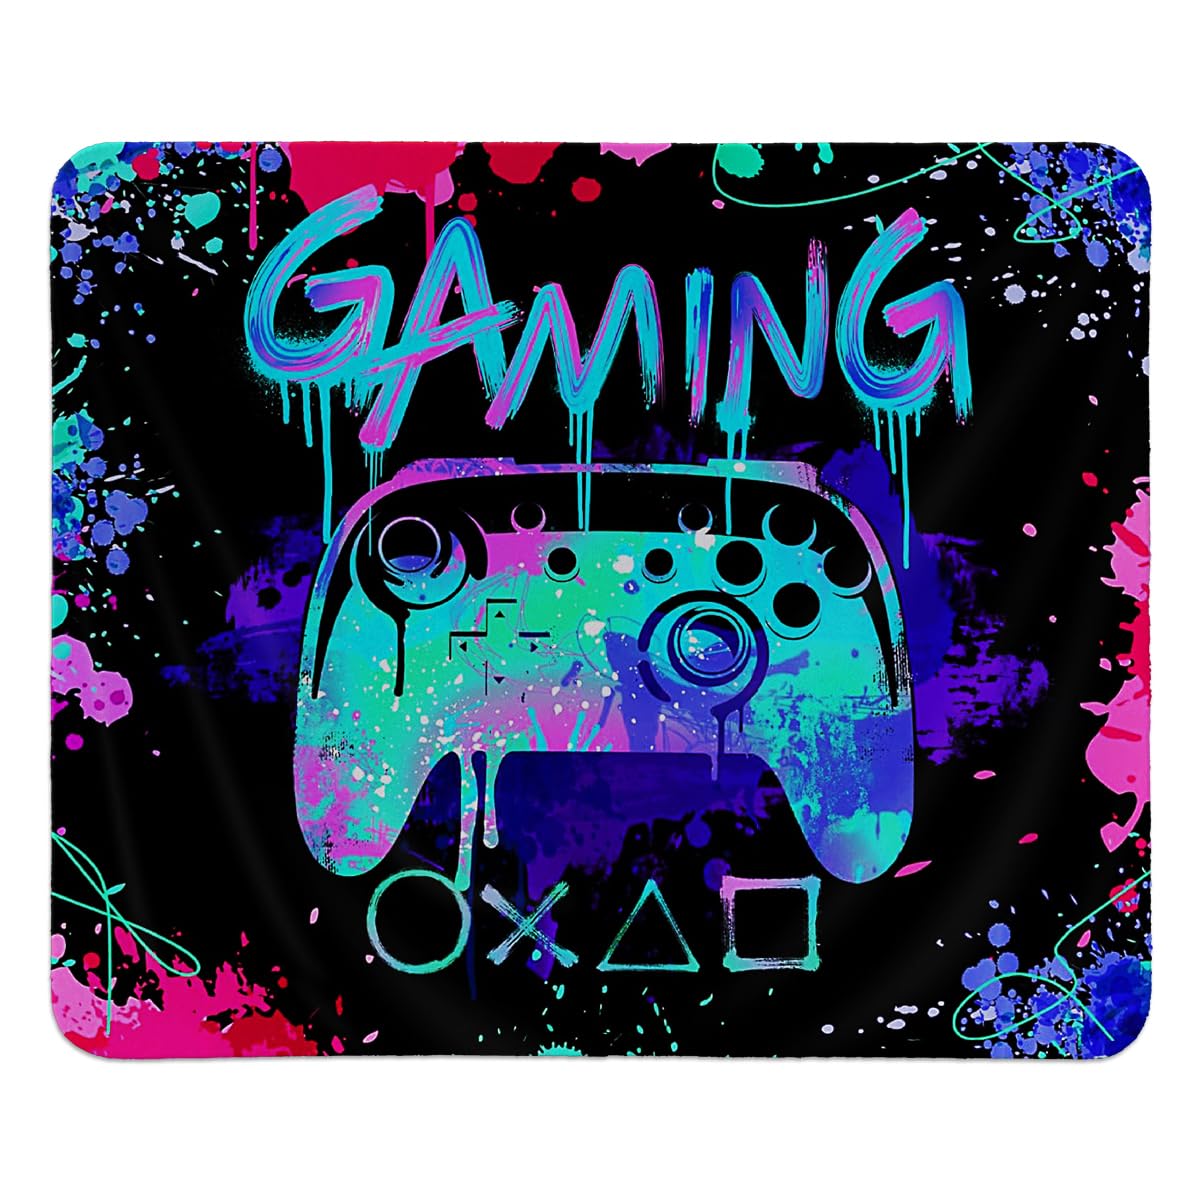 hold fizz Gamer Mouse Pad,Gaming Mouse Pad,Gaming Desk Accessories,Gaming Desk Decor,Gaming Room Decor,Boys Room Decor,Teenage Boy Room Decor,Mouse Pads for Desk,Square Mouse Pad 9.5x7.9 Inch - amzGamess